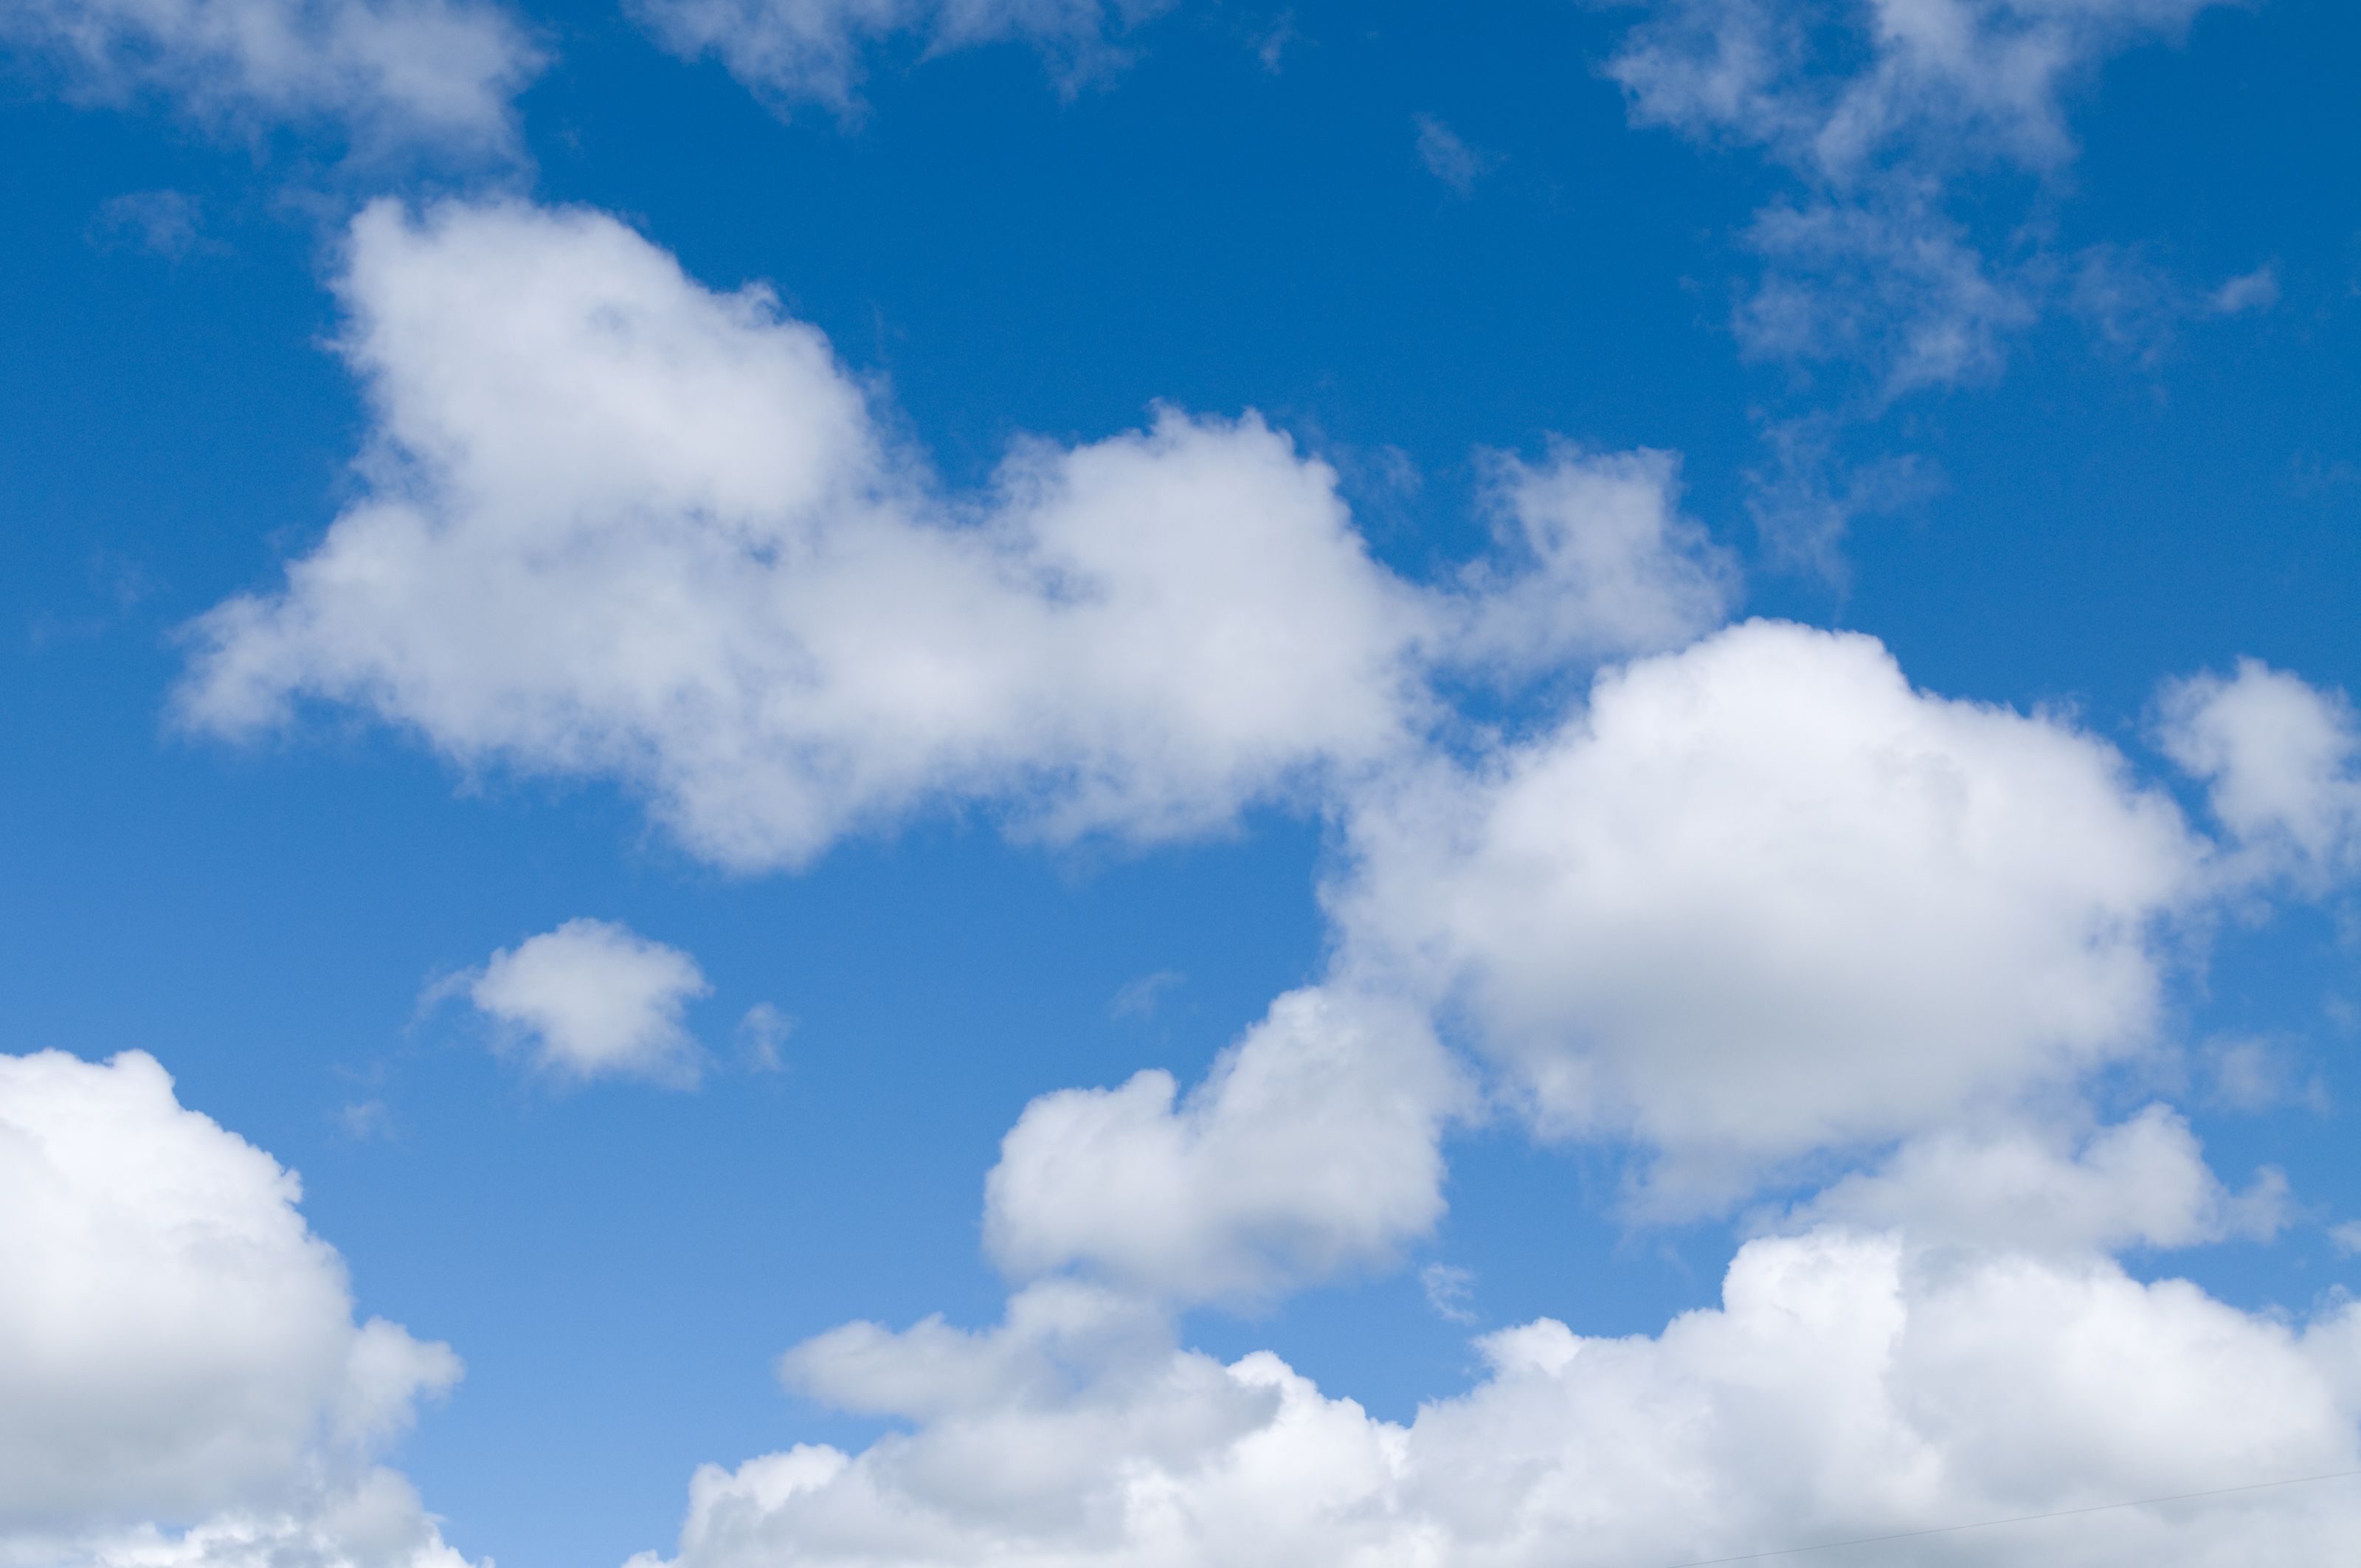 3769300 Blue Clouds Stock Photos Pictures  RoyaltyFree Images   iStock  Sky blue clouds Dark blue clouds Blue clouds background